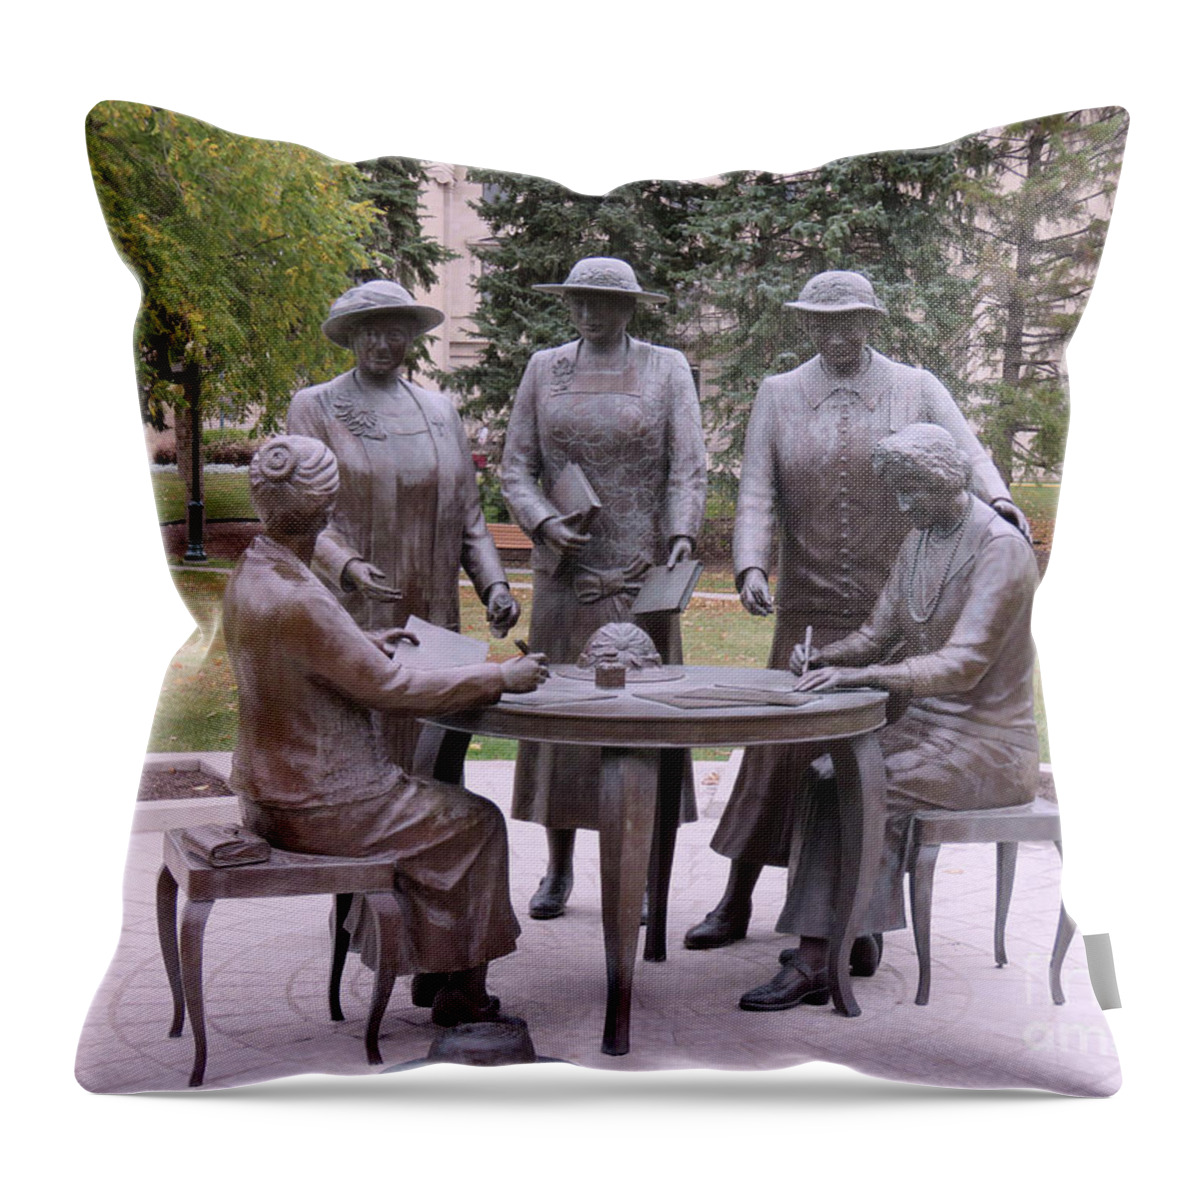 Canada Throw Pillow featuring the photograph Empowerment by Mary Mikawoz